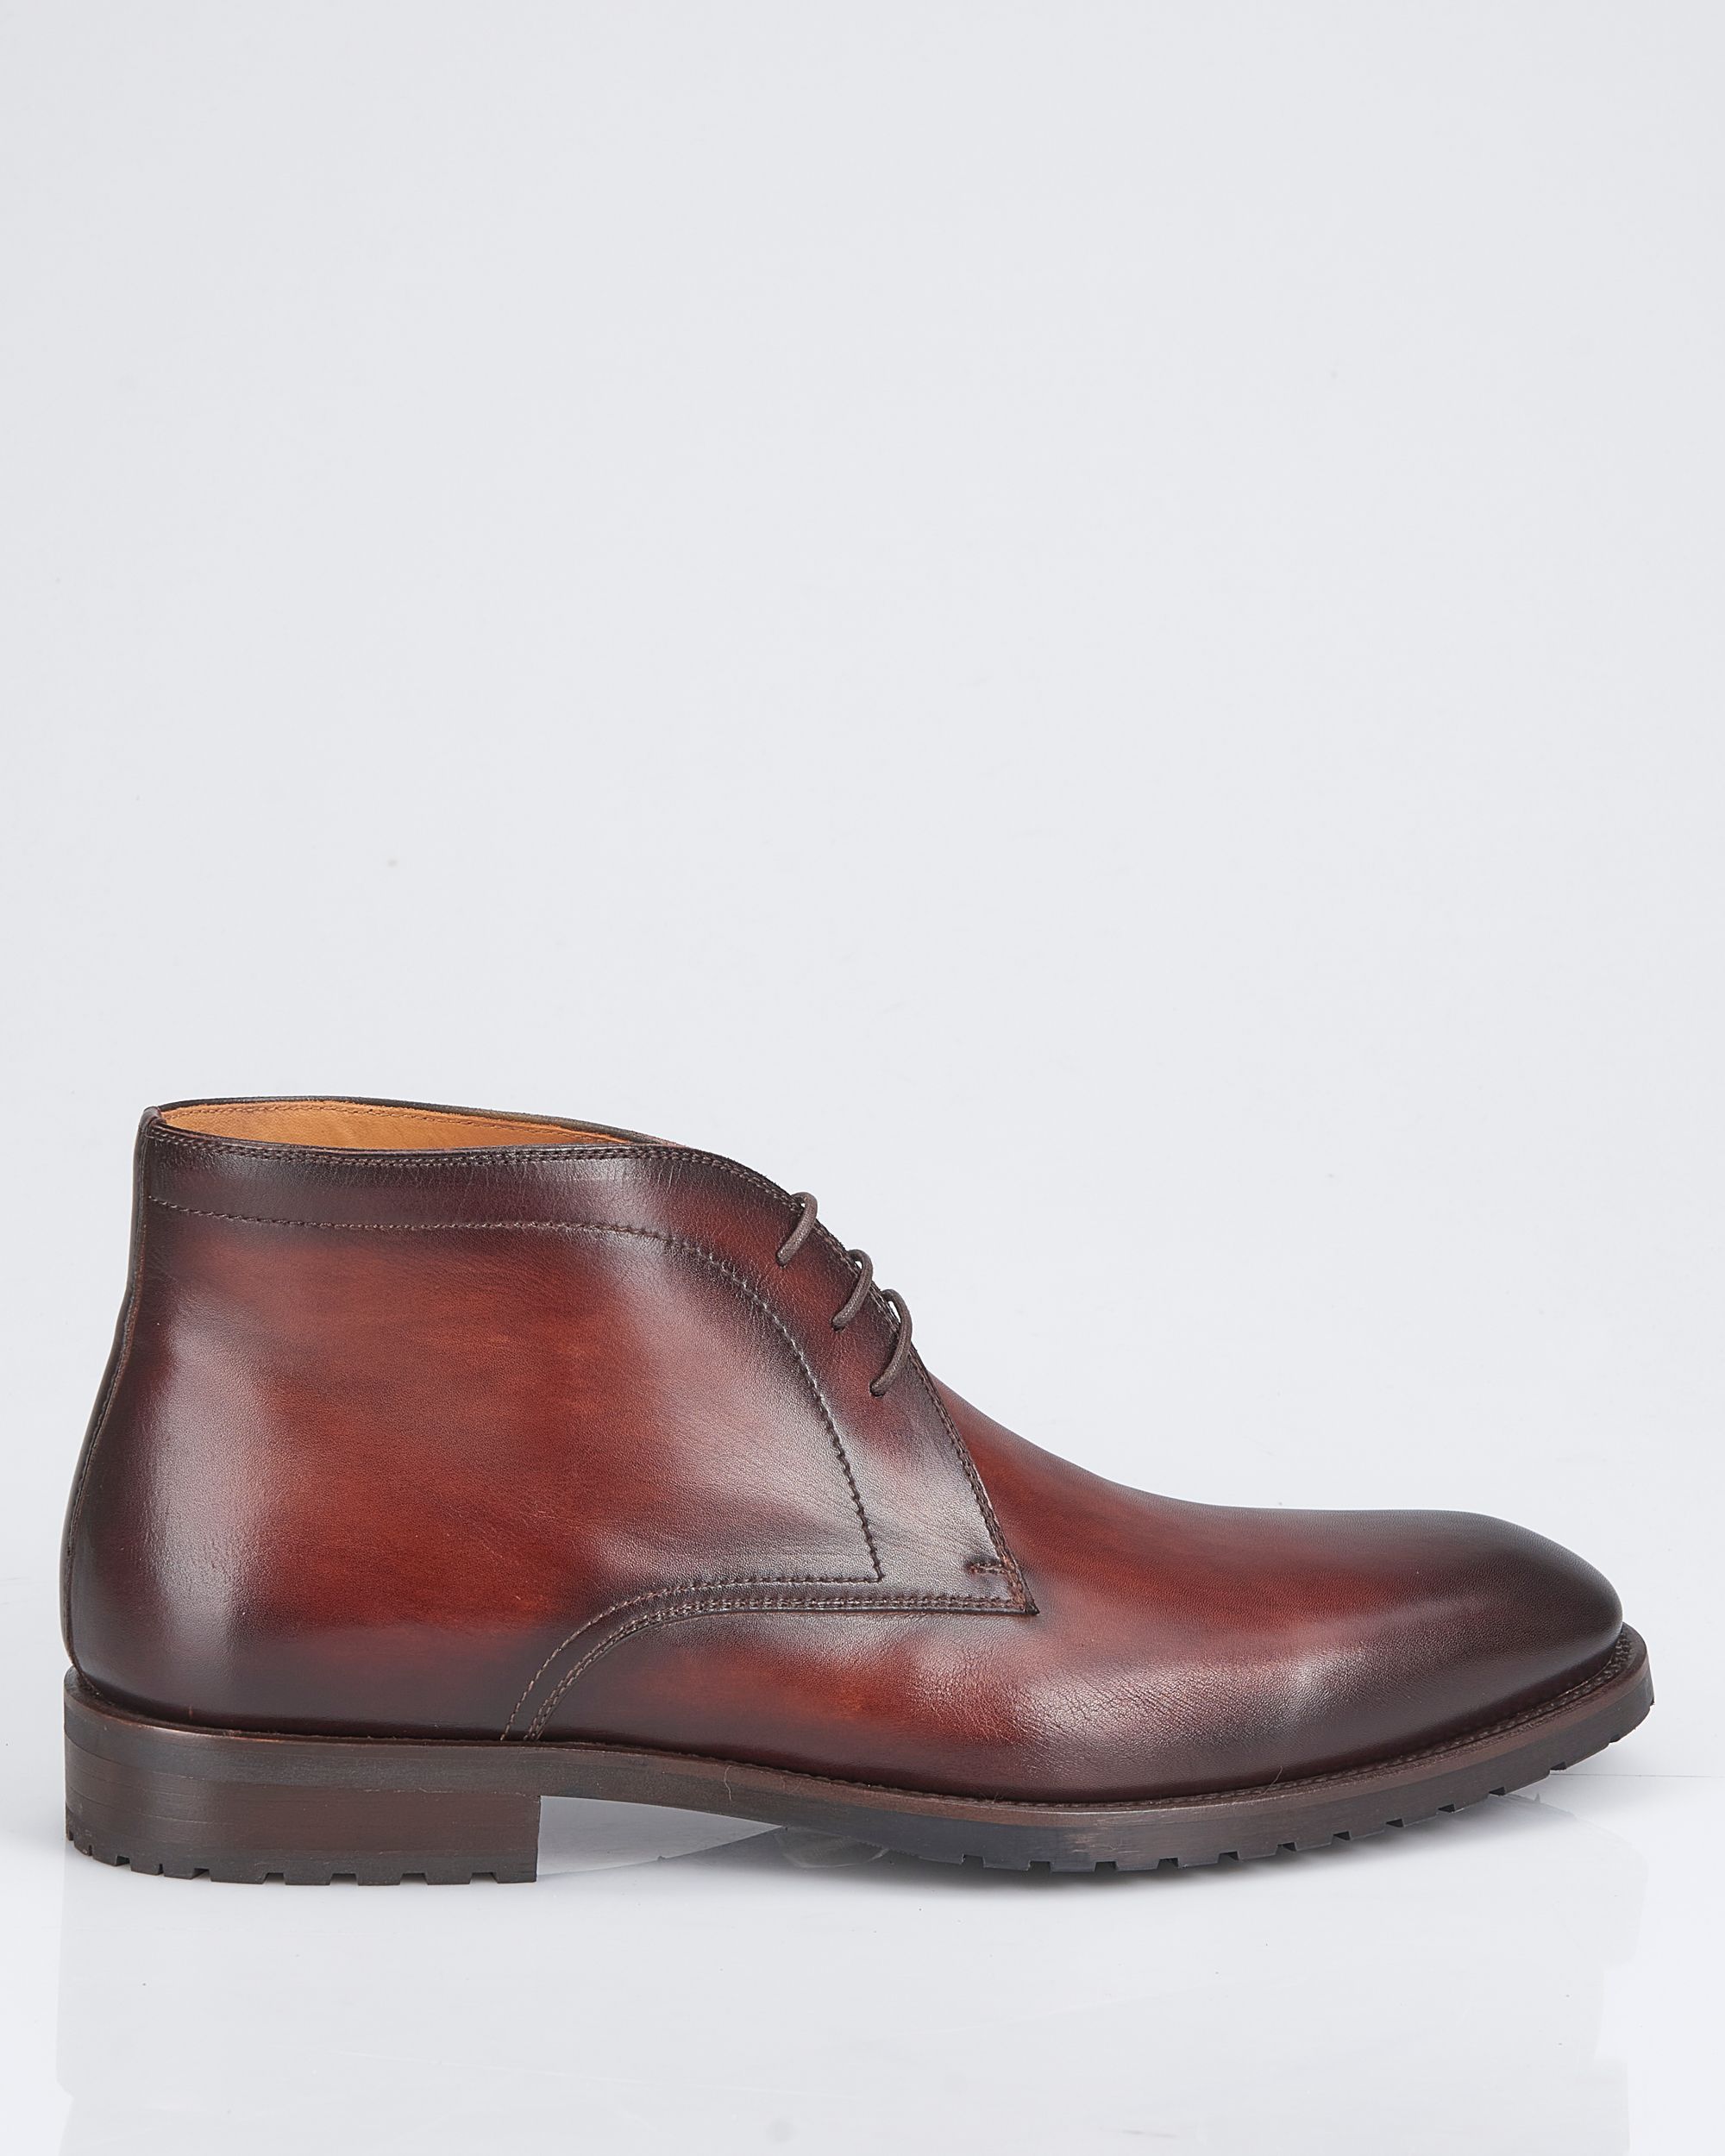 Magnanni Boots Donker bruin 086802-001-41